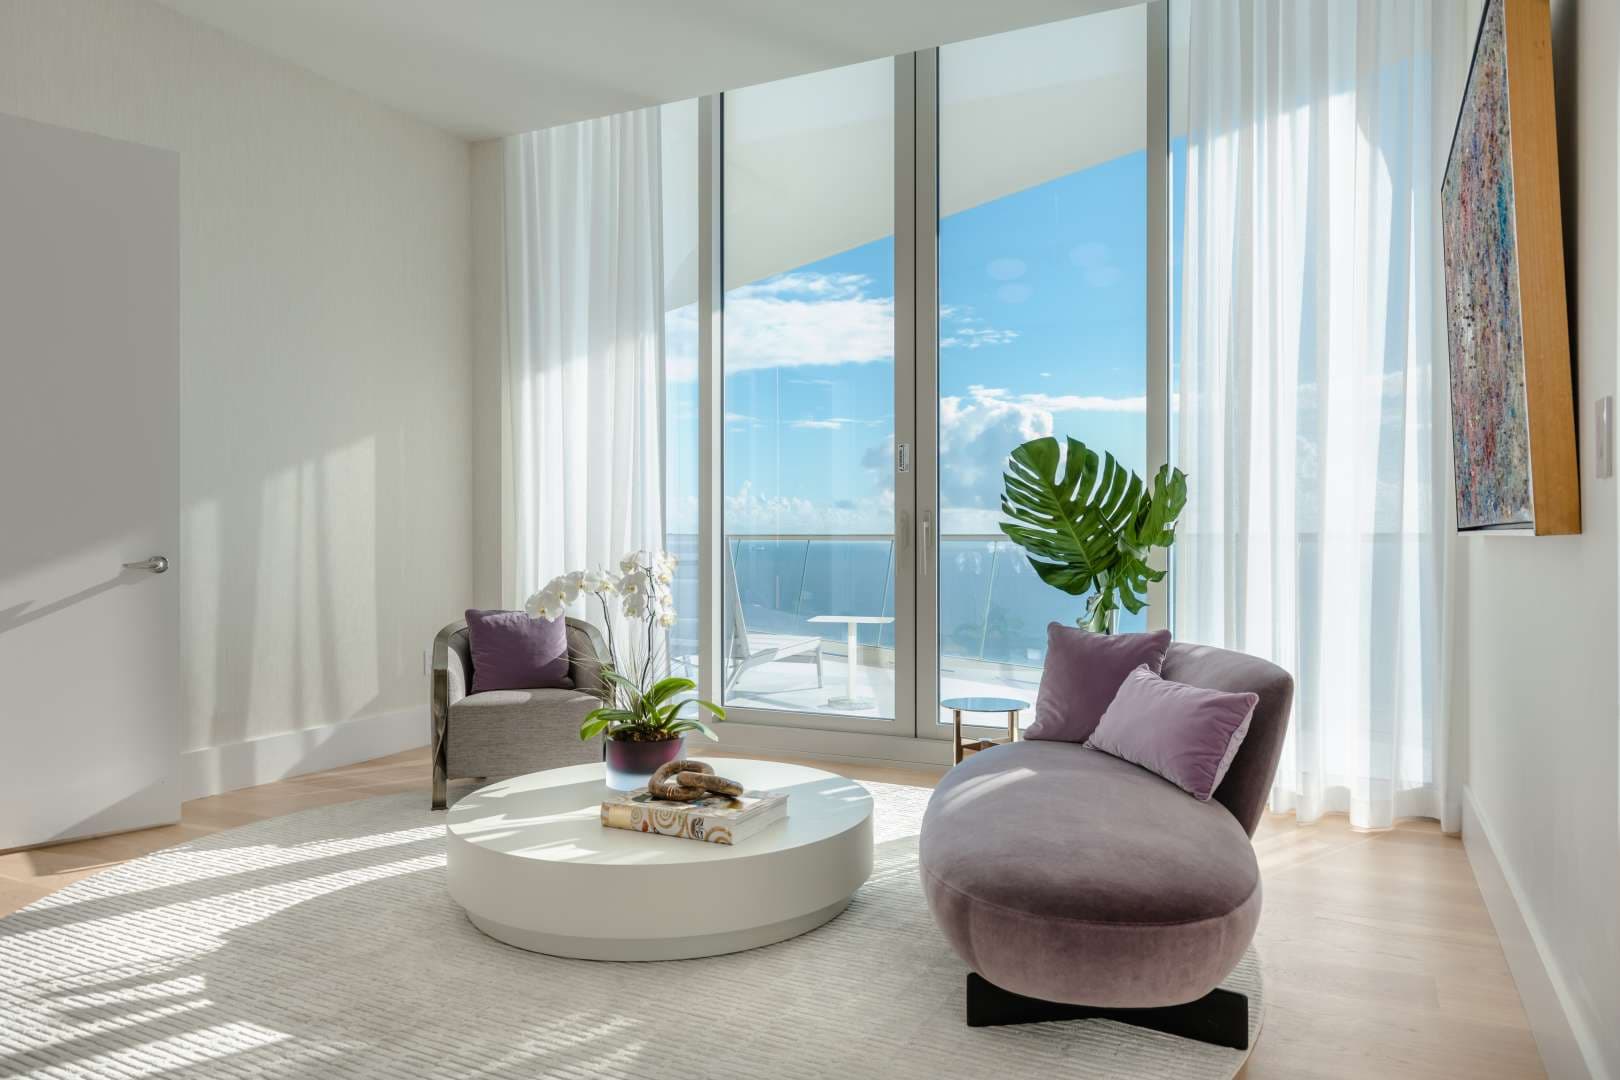 6 Bedroom Penthouse For Sale Miami Lp10448 2b257fa35a9a4c00.jpg